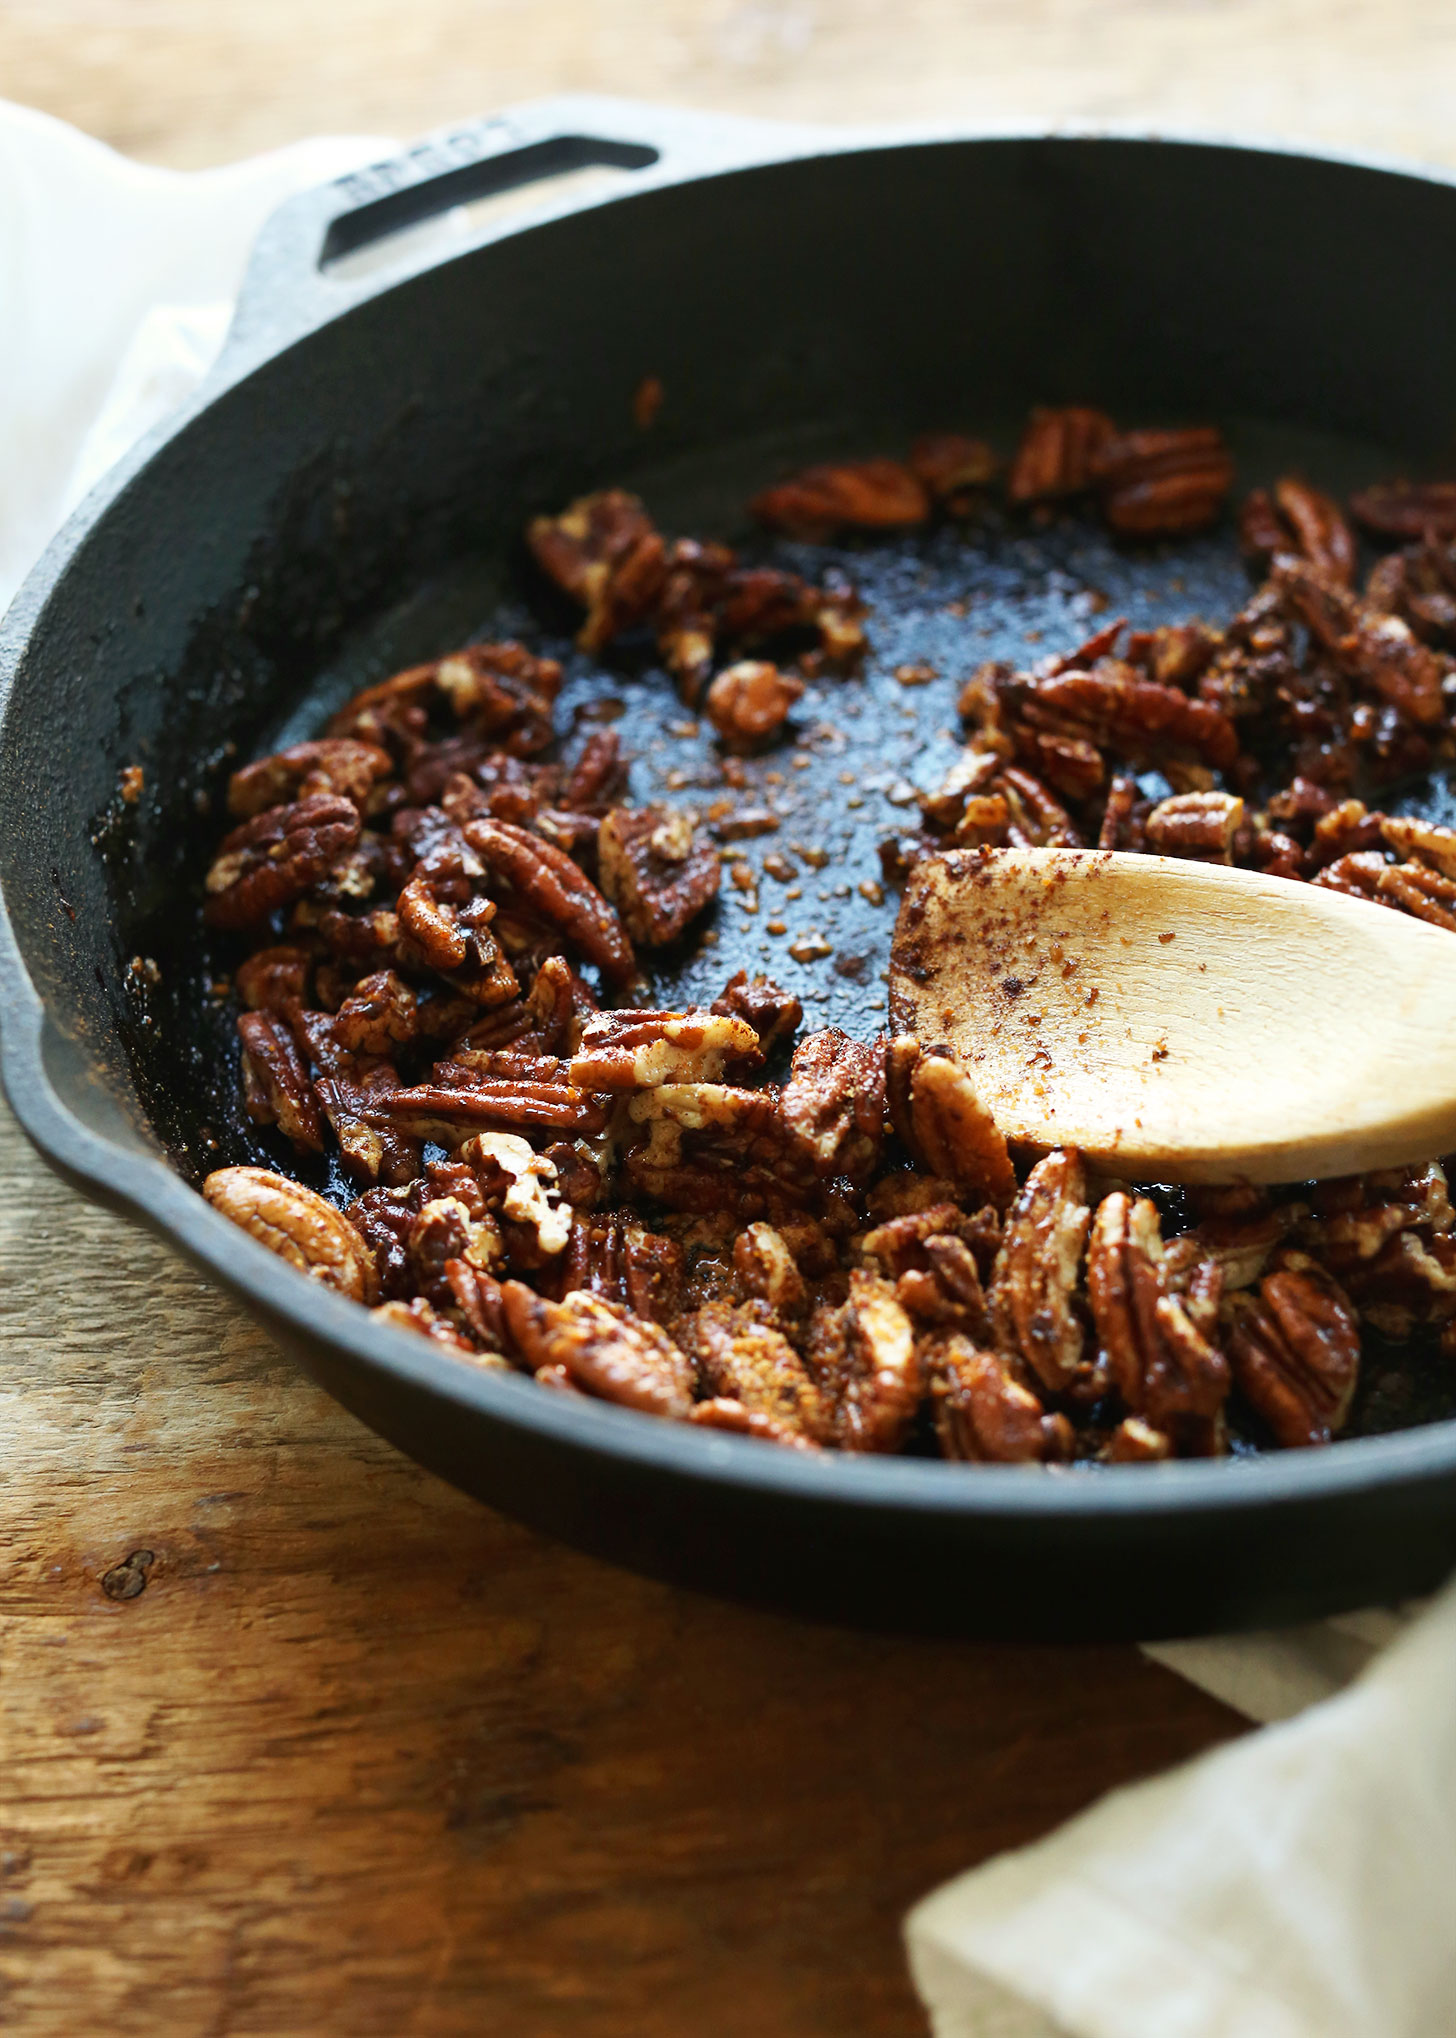 Making Maple Cinnamon Pecans in a cast-iron skillet for a gluten-free vegan Thanksgiving dish